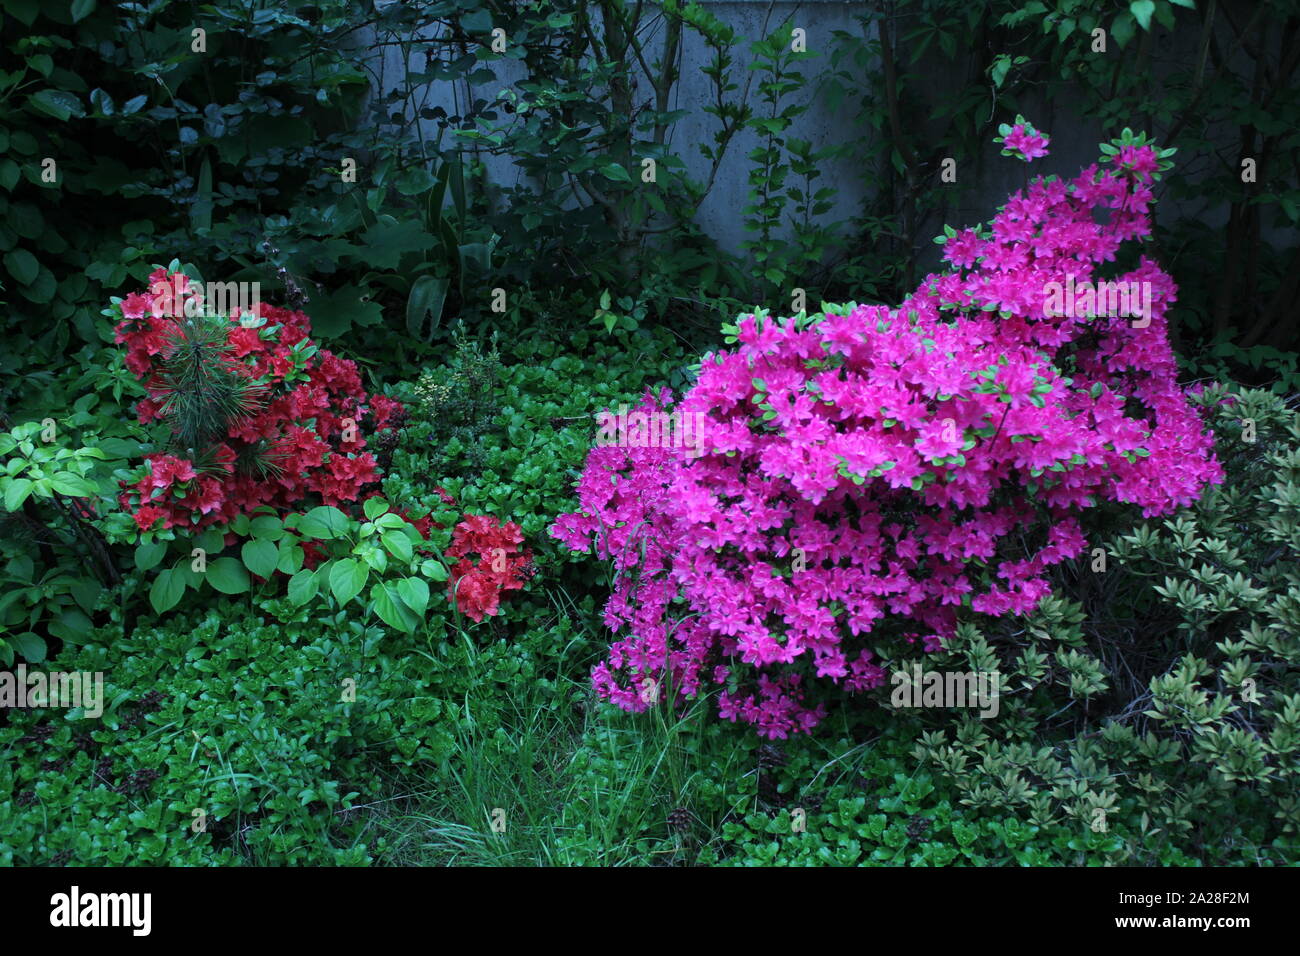 Two different Azaleas flowering in a garden at Recklinghausen, Germany Stock Photo